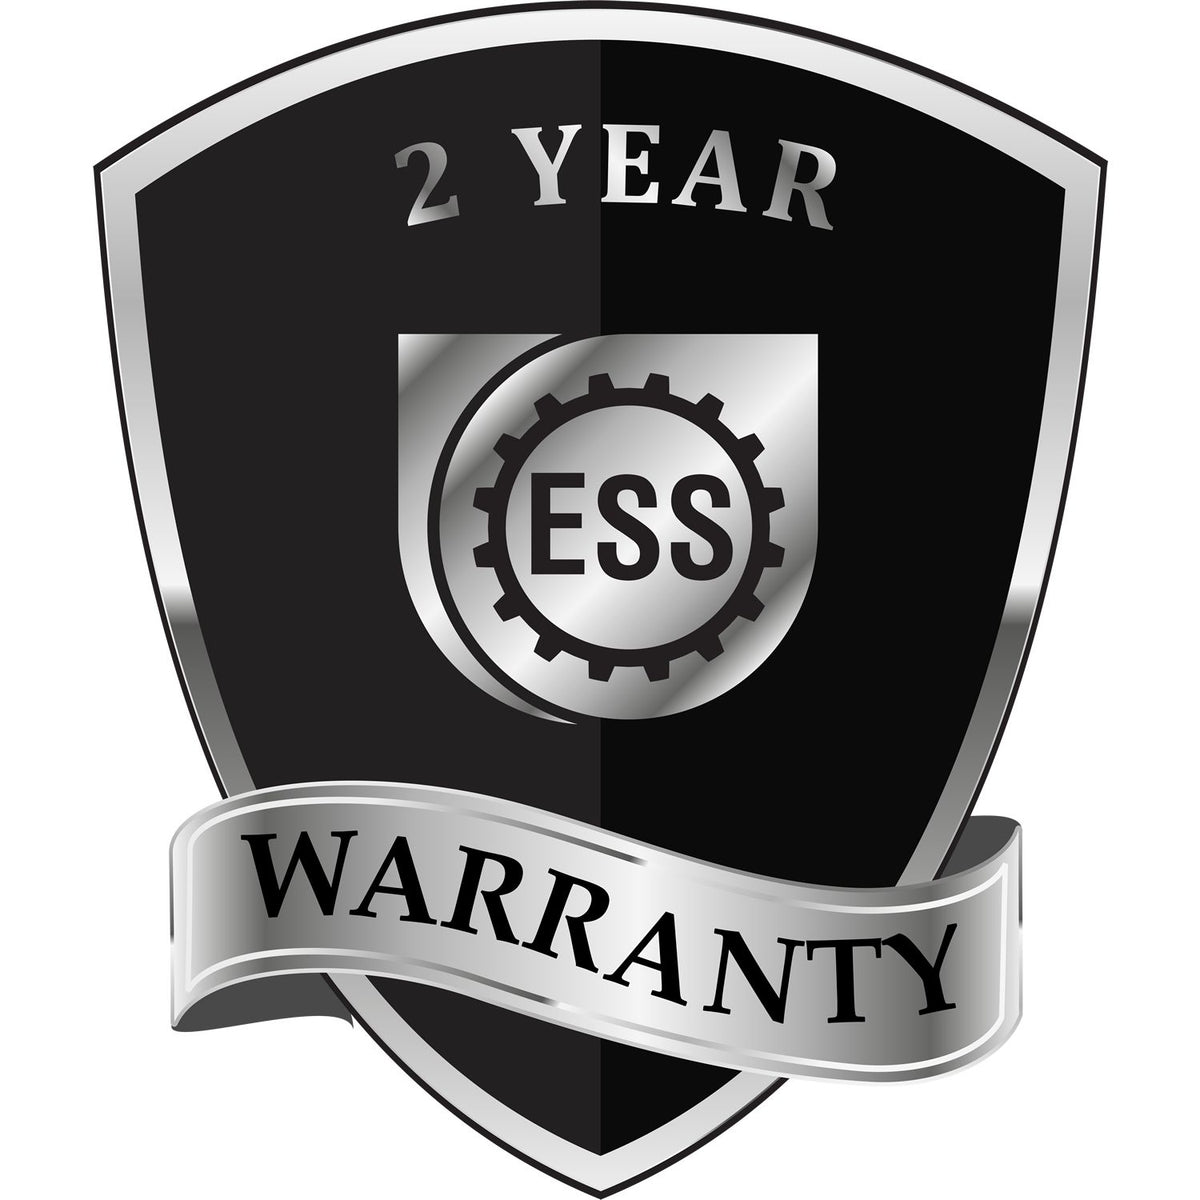 A black and silver badge or emblem showing warranty information for the Gift Pennsylvania Architect Seal